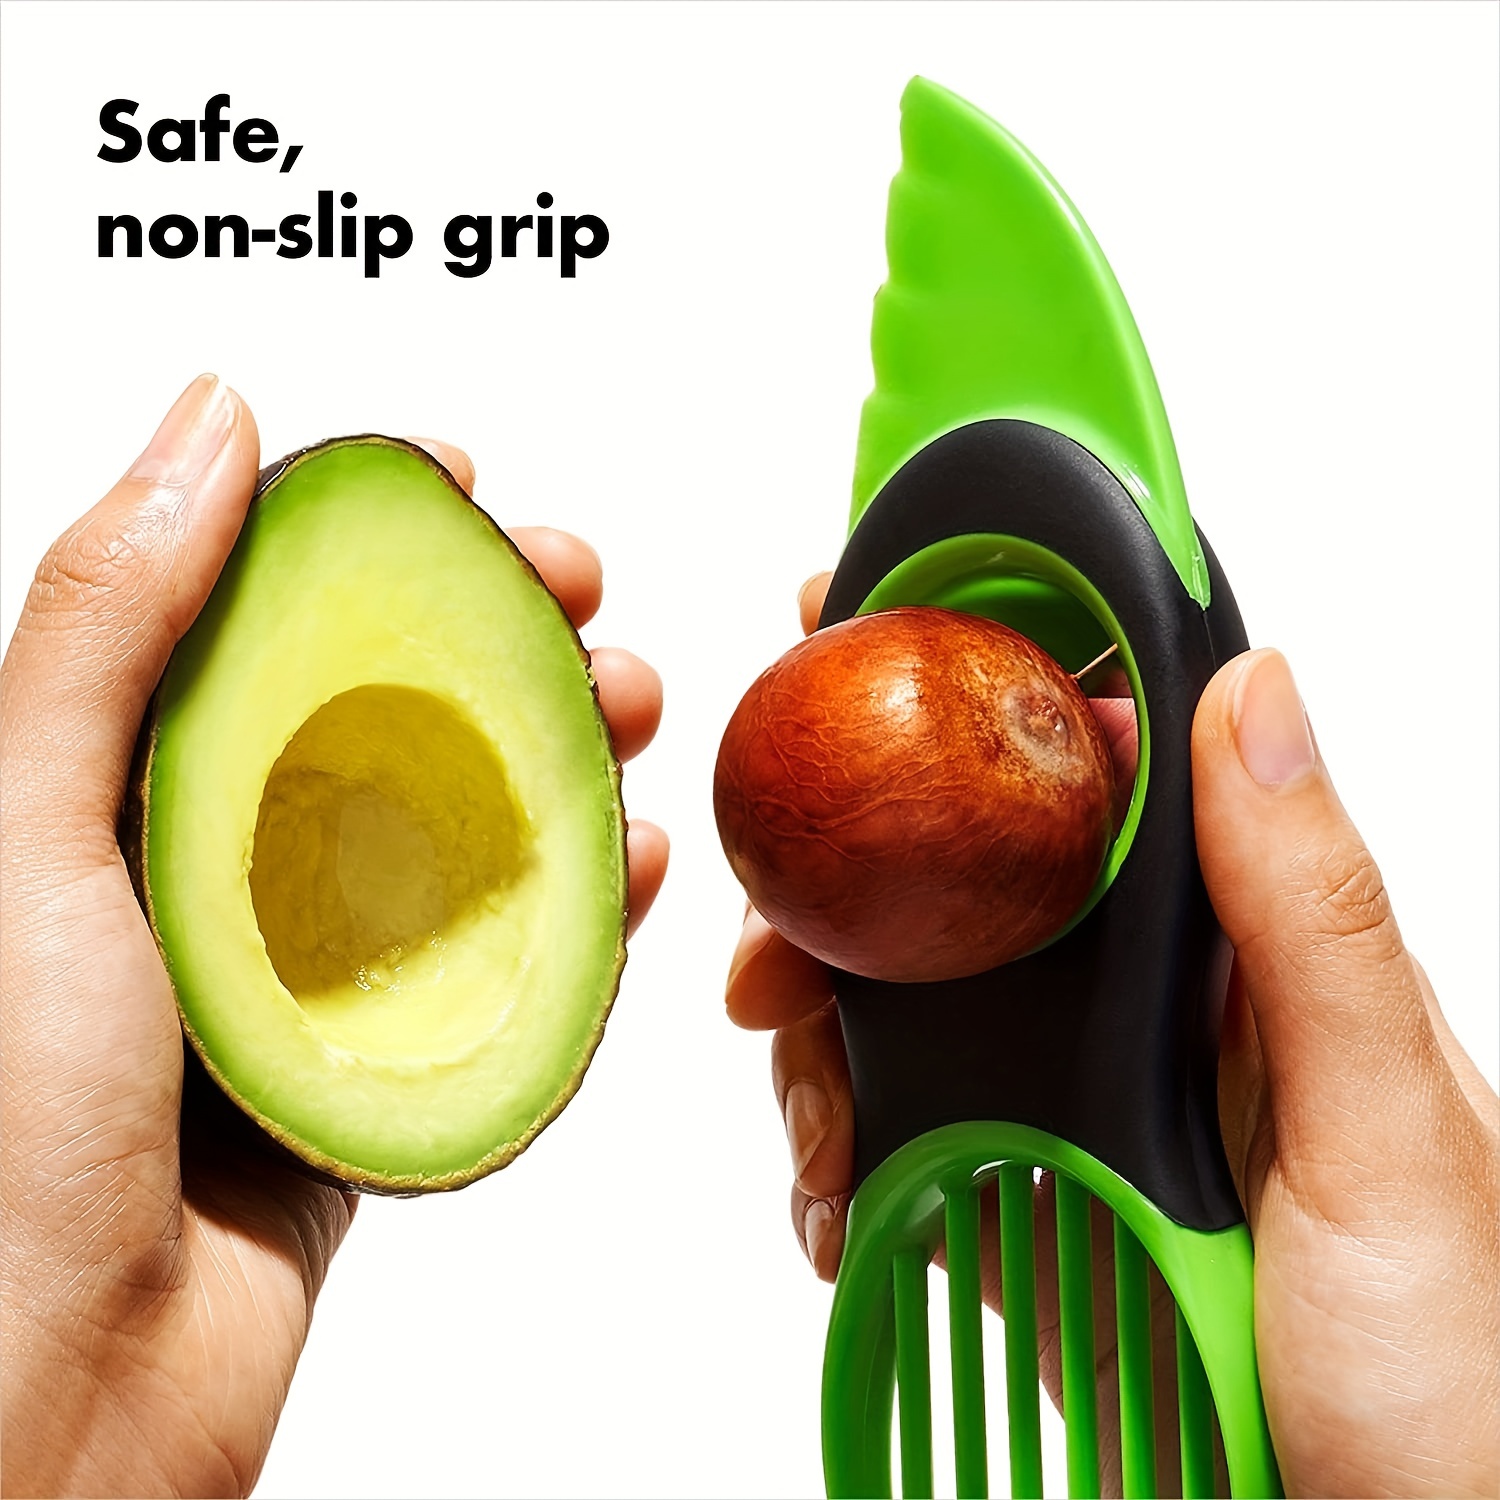 1pc 3-in-1 Avocado Knife - Avocado Slicer, Pitter And Cutter